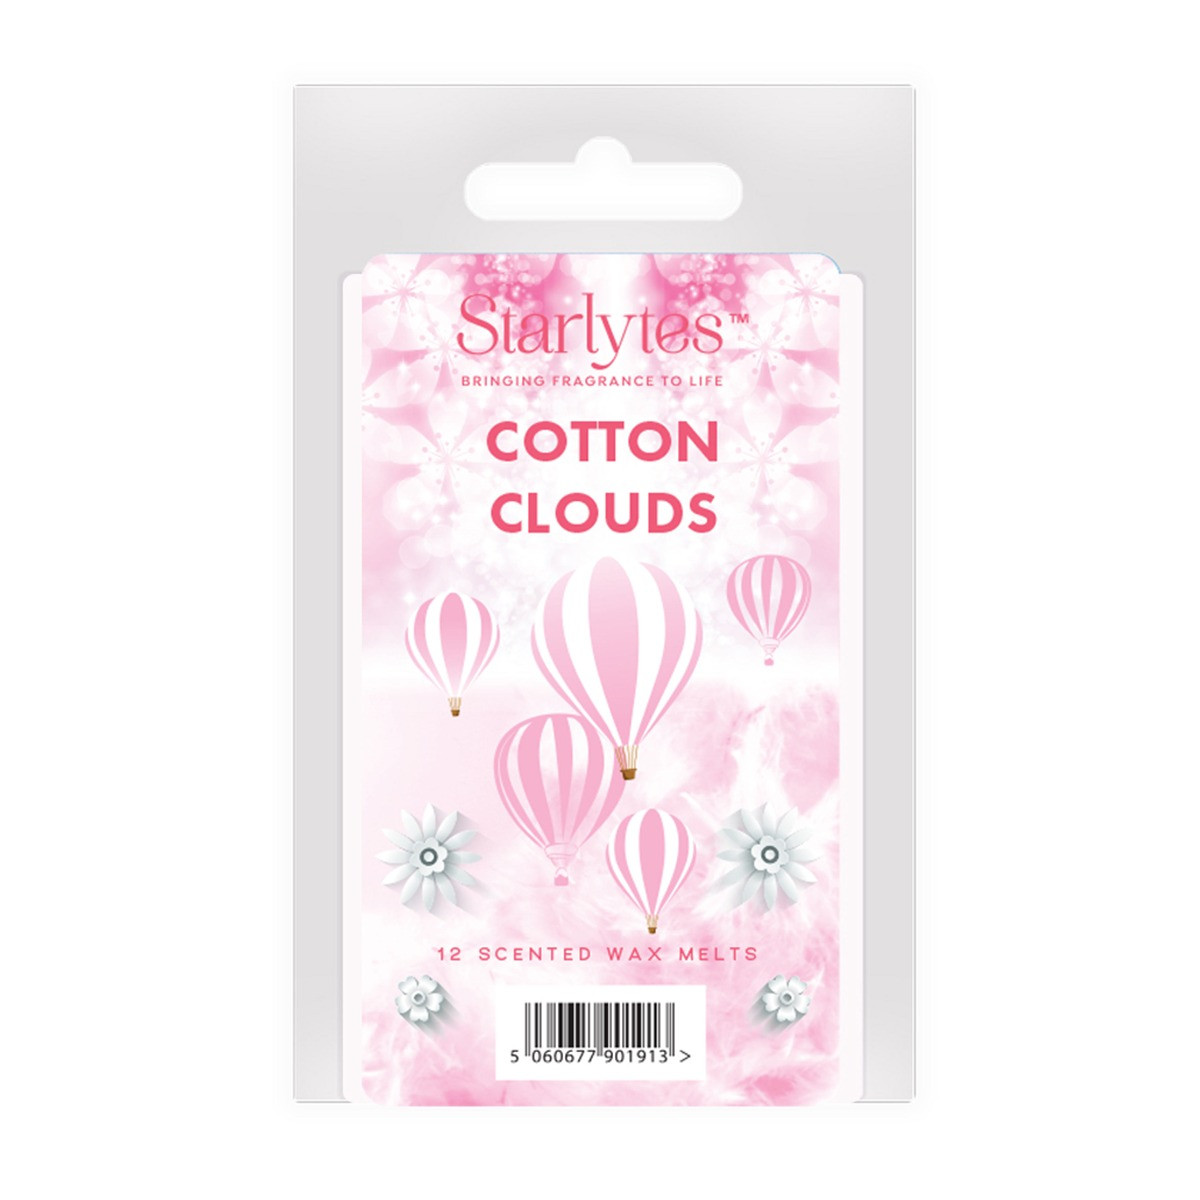 Starlytes Wax Melts 12 Pack - Cotton Clouds>